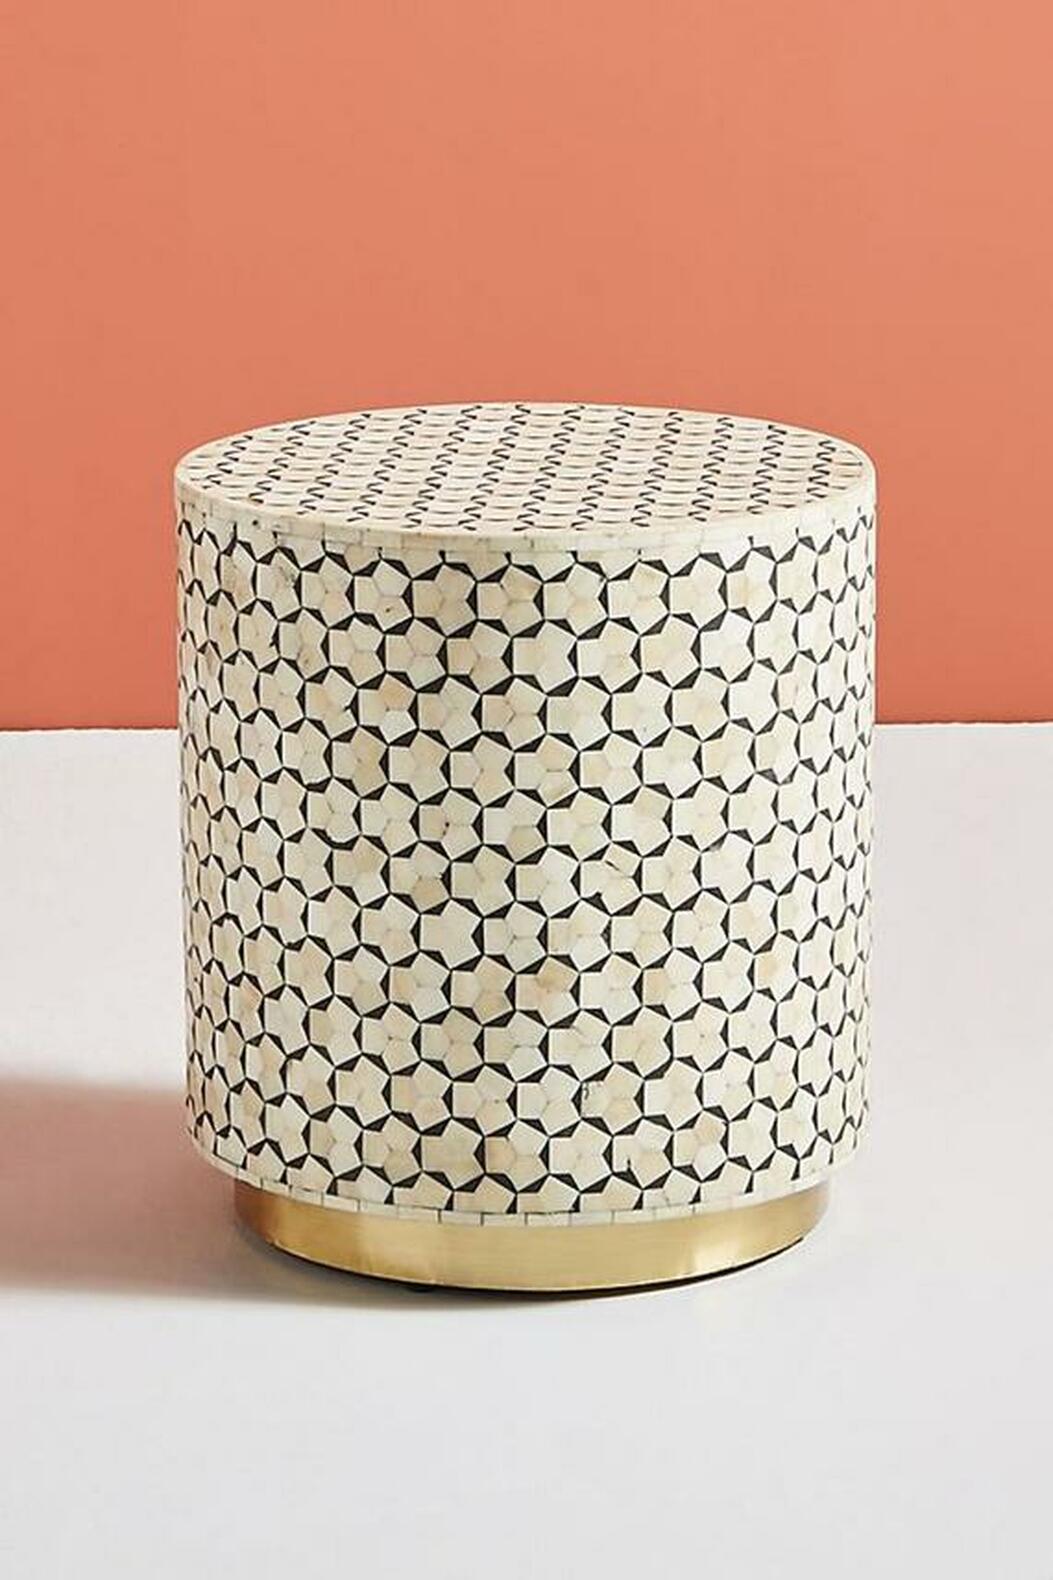 Targua Bone Inlay Drum / Side table in Black and White with Brass polished Base